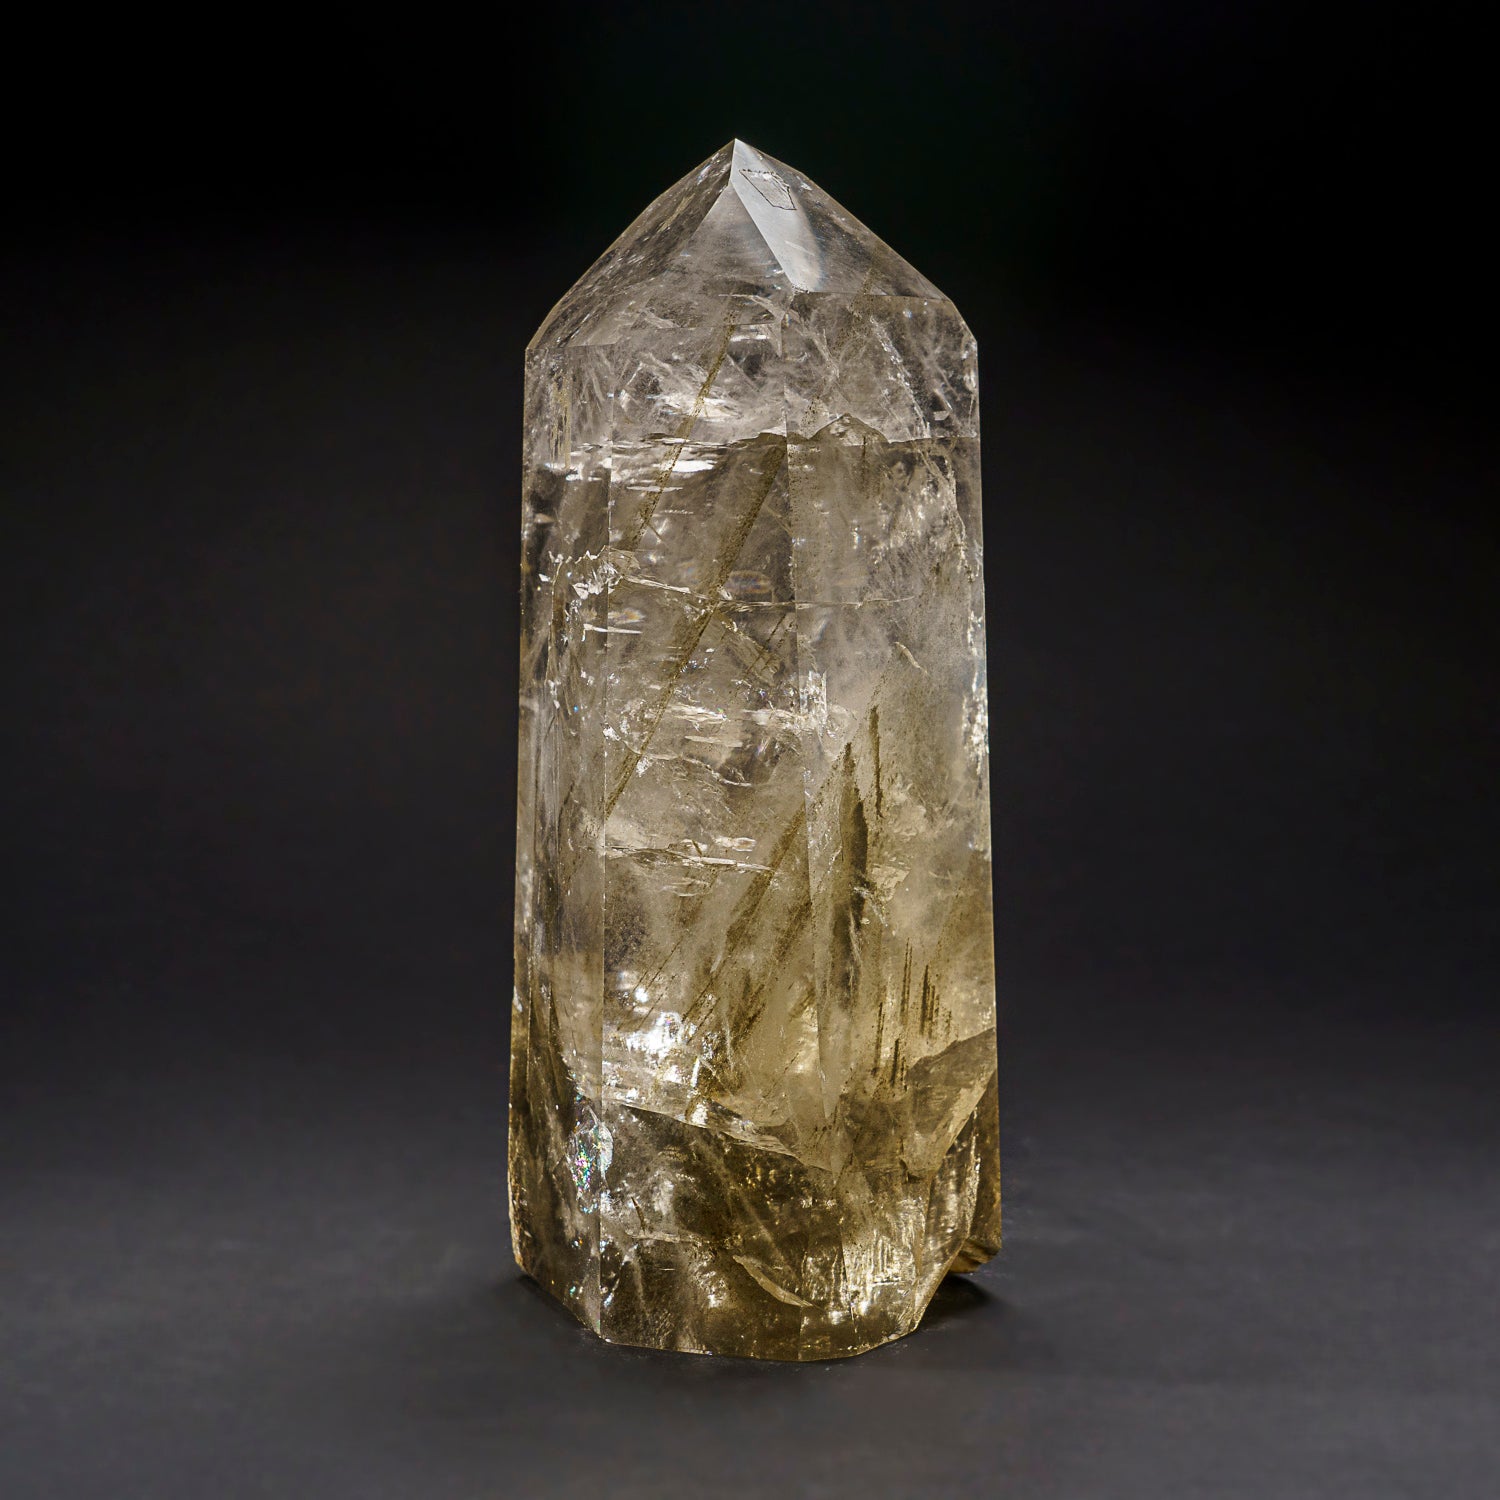 Genuine Polished Clear Quartz Point From Brazil (7.5 lbs)